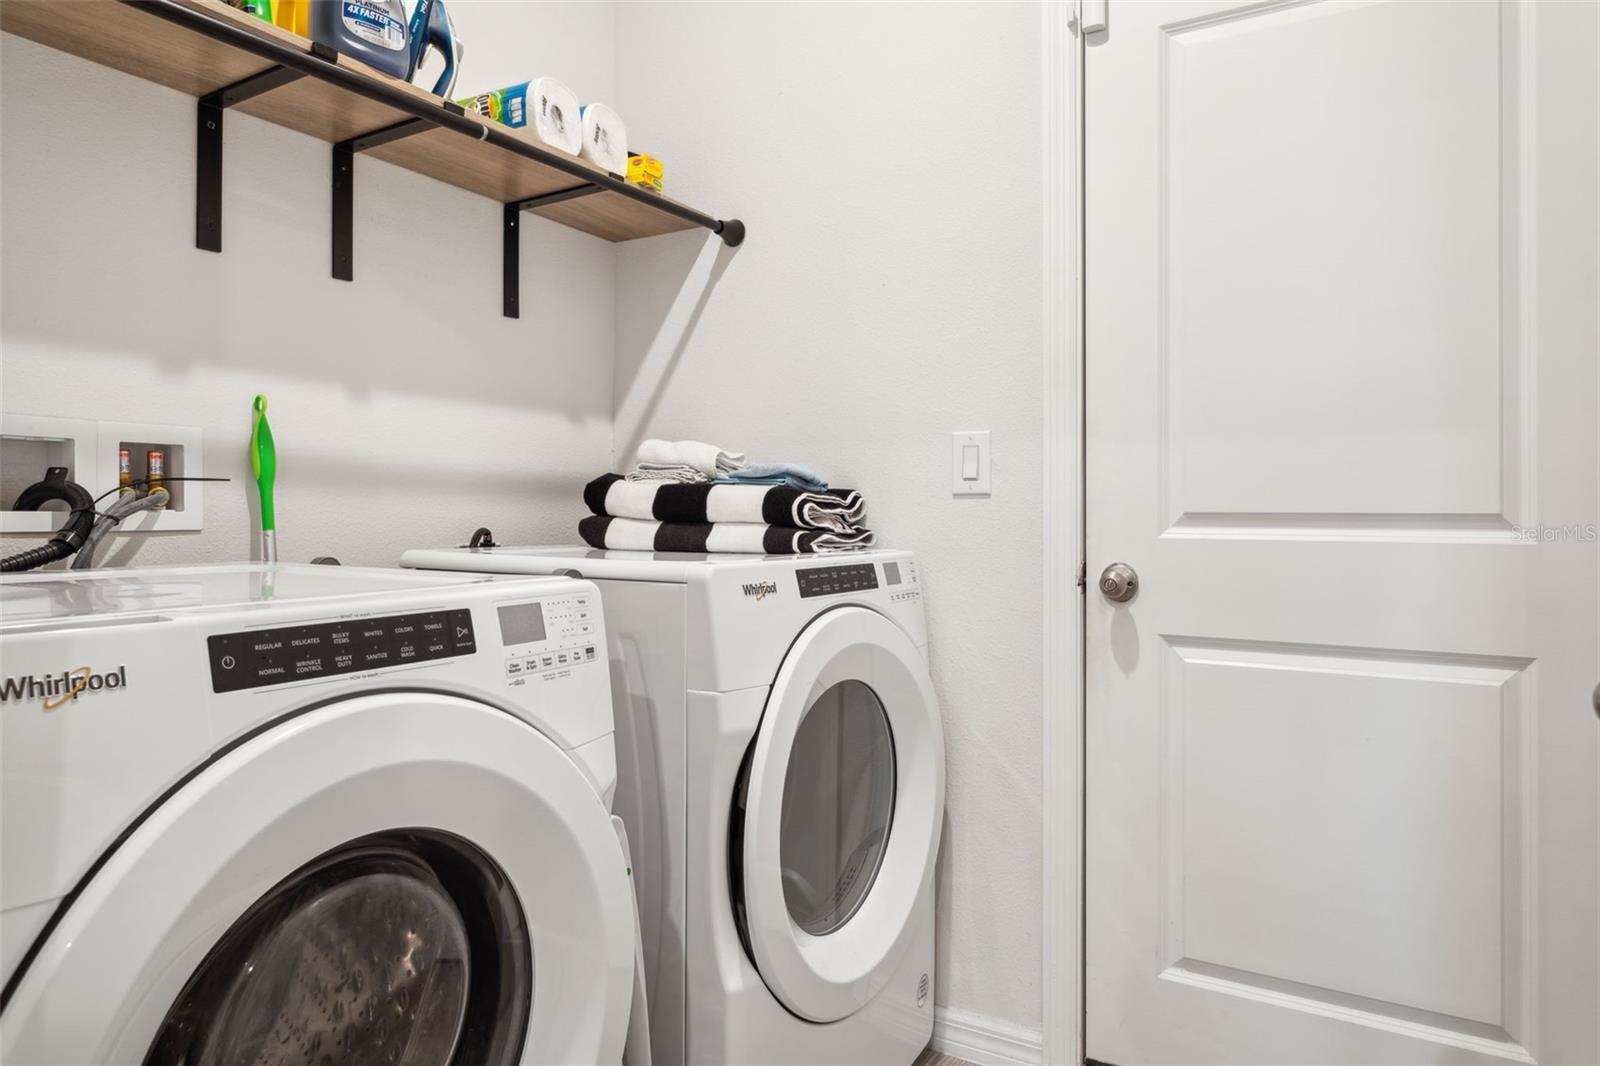 Laundry room is just off the garage and kitchen areas.